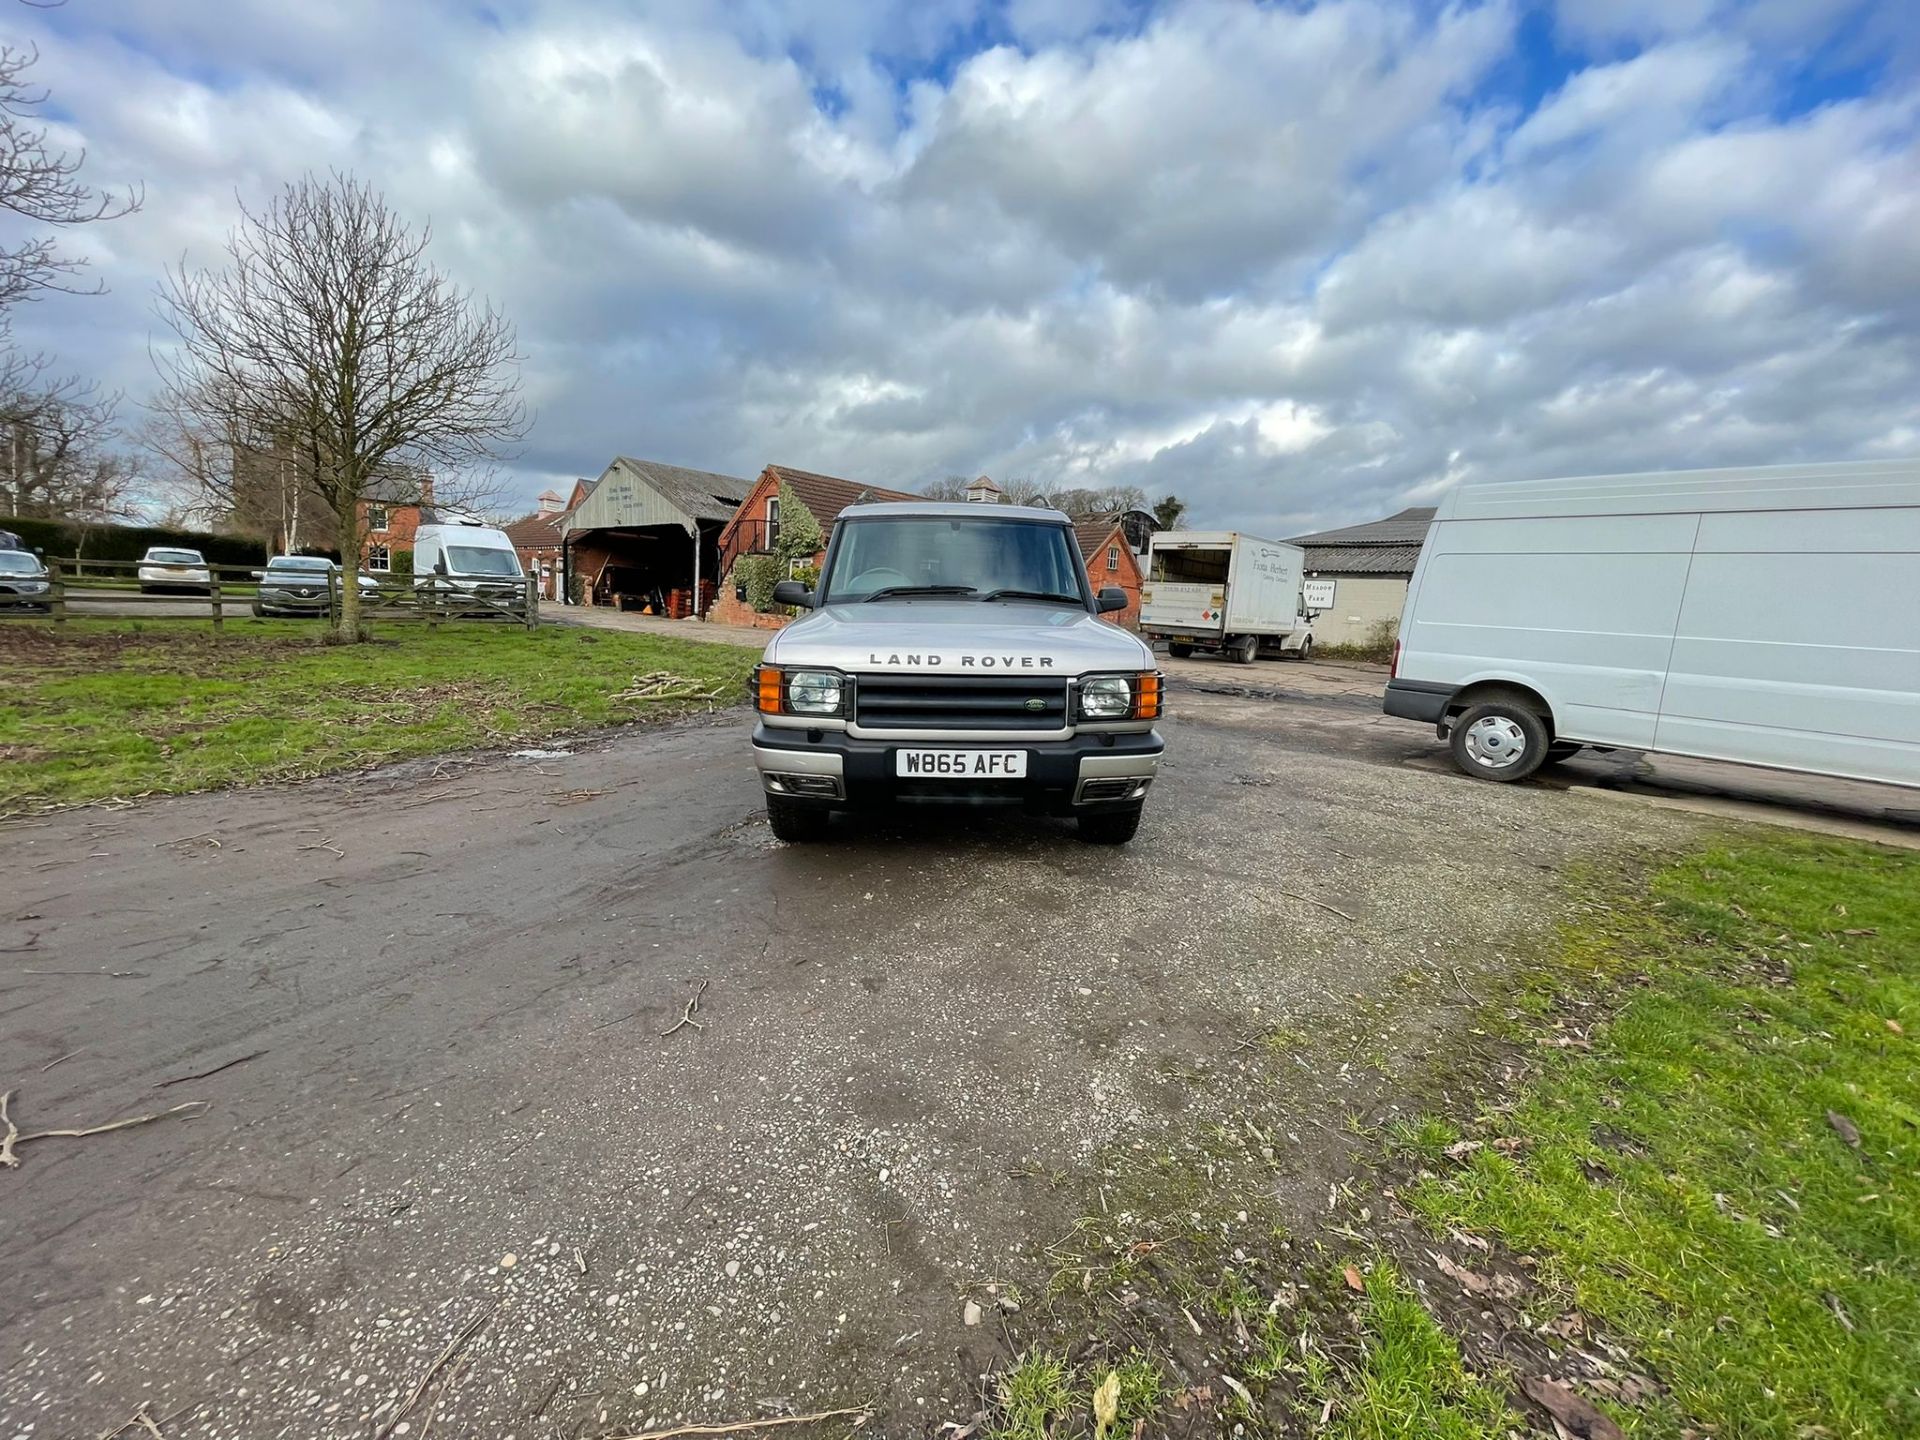 2000 LAND ROVER DISCOVERY TD5 ES SILVER ESTATE, 271,031 MILES, GALVANISED CHASSIS *NO VAT* - Image 2 of 17